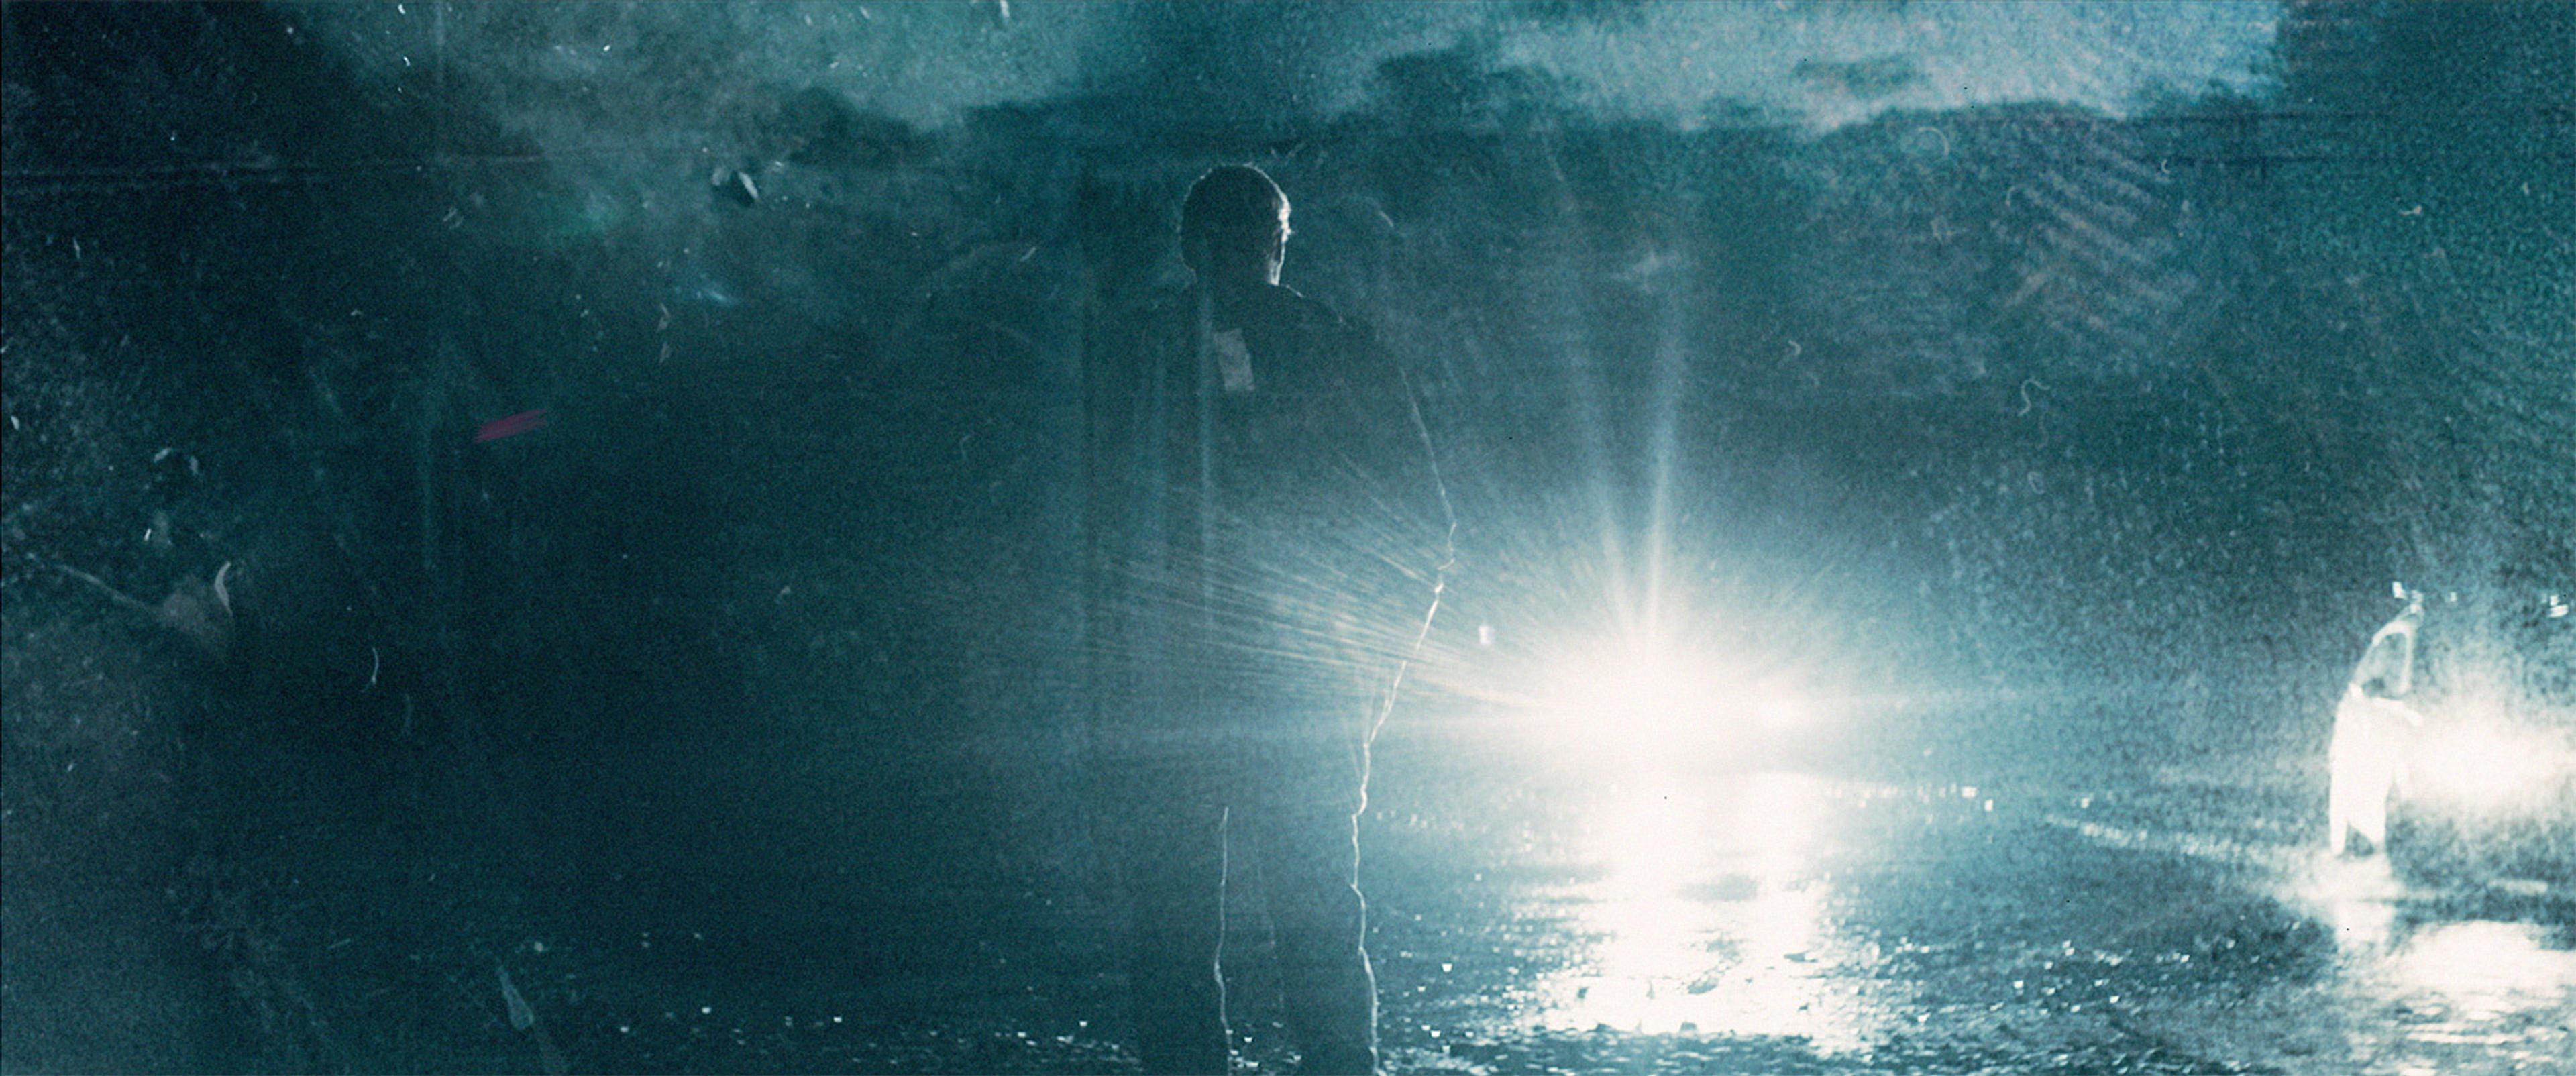 wisting standing in rainy night, from season 2 title sequence